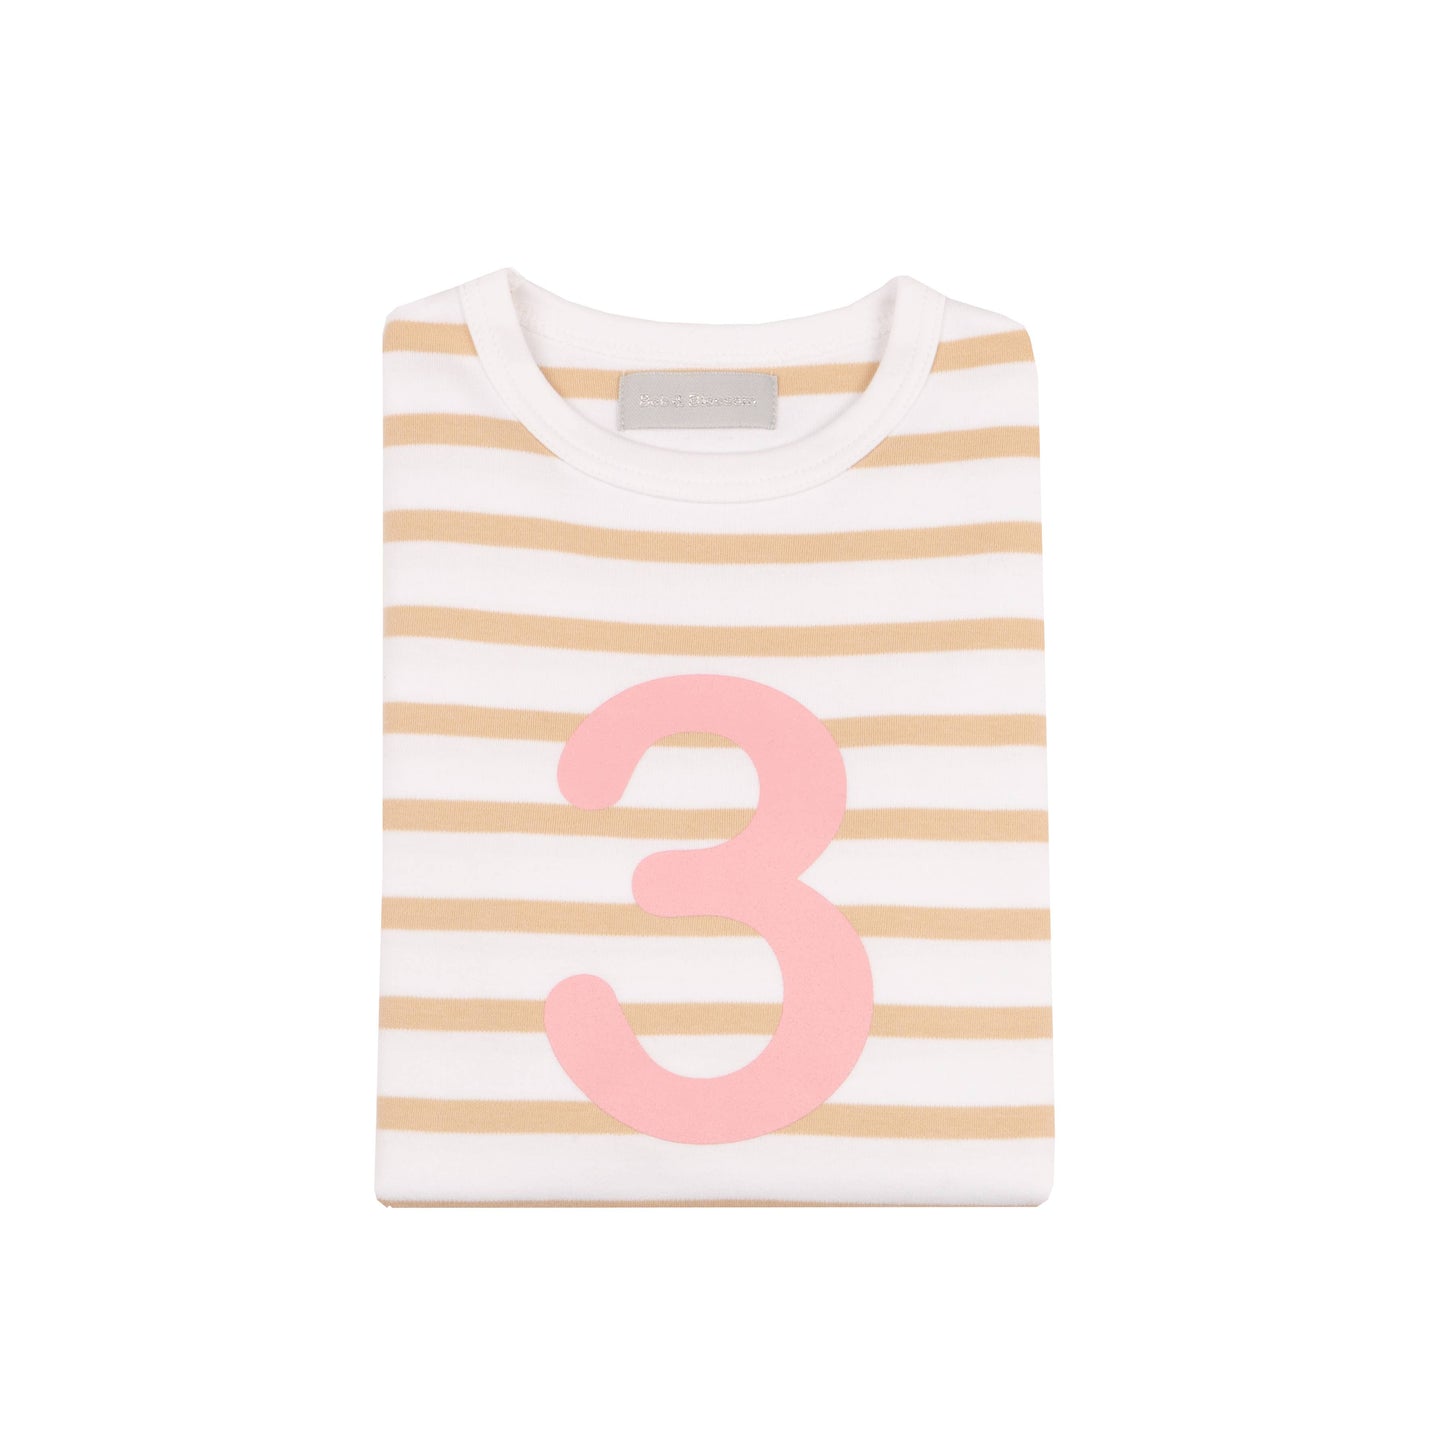 Biscuit & White Striped 3 (Pink) Shirt